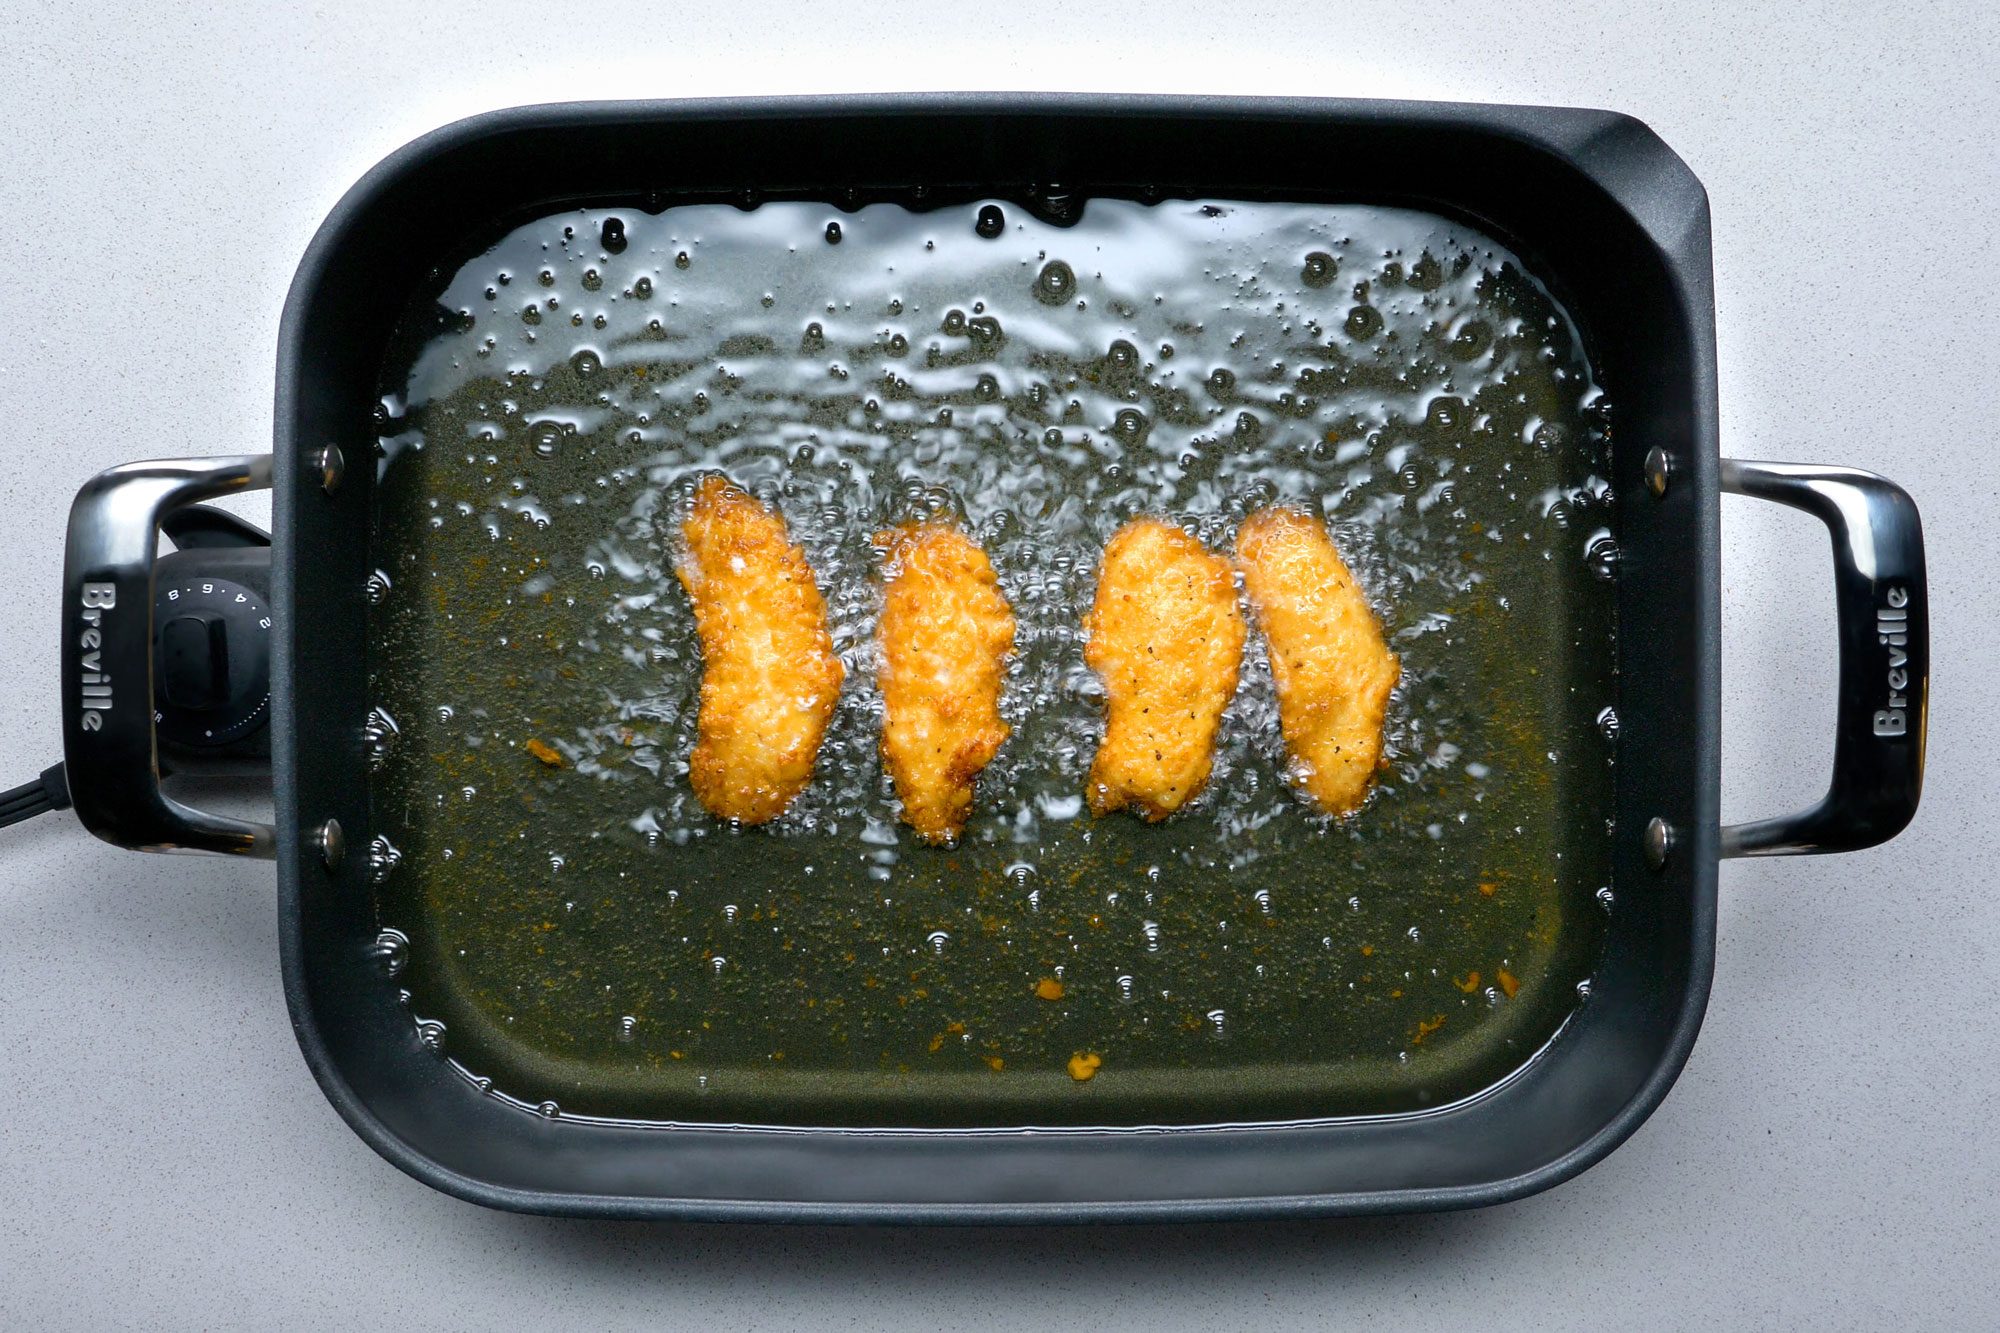 Overhead shot of deep-fat frying chicken strips in an electric skillet on grey marble background